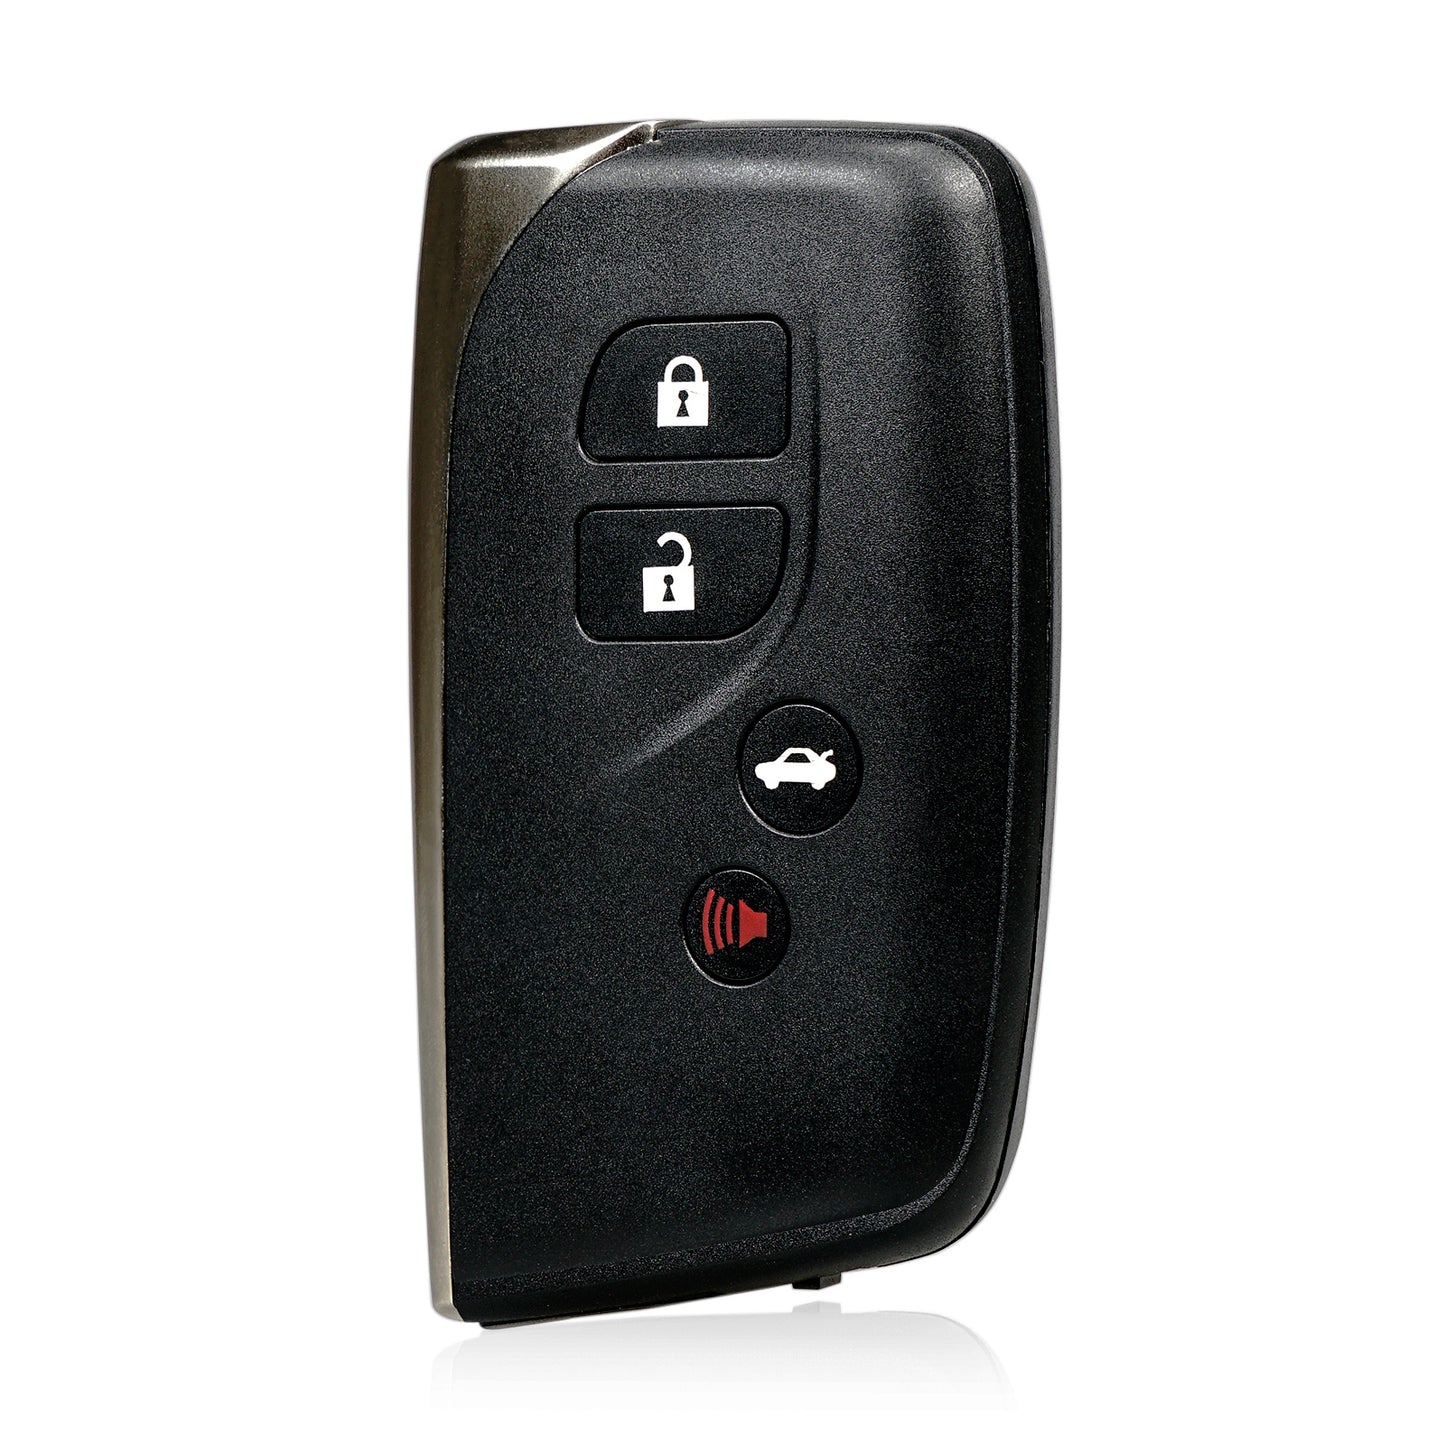 4 Buttons 314.3MHz Keyless Entry Fob Remote Car Key For 2013-2017 LS460 600h FCC ID: HYQ14ACX-5290 SKU : J682